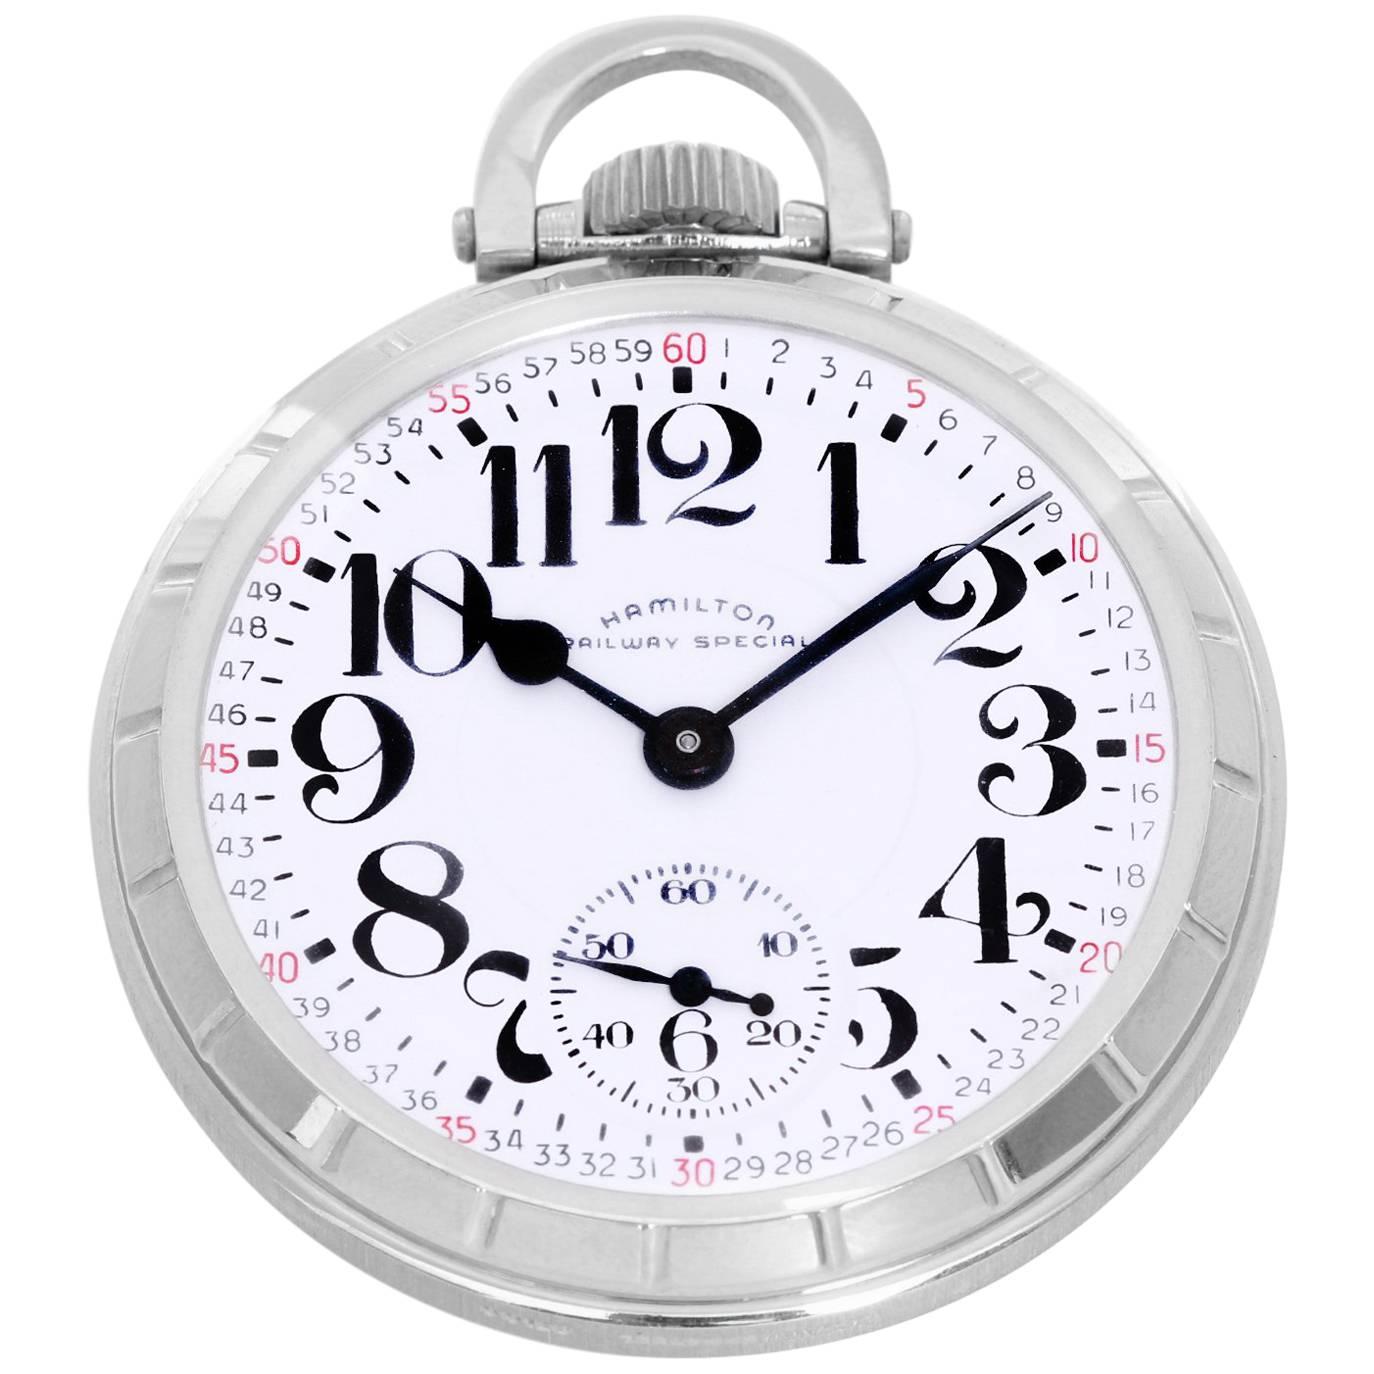 Hamilton Stainless Steel Railway Special Manual Pocket Watch